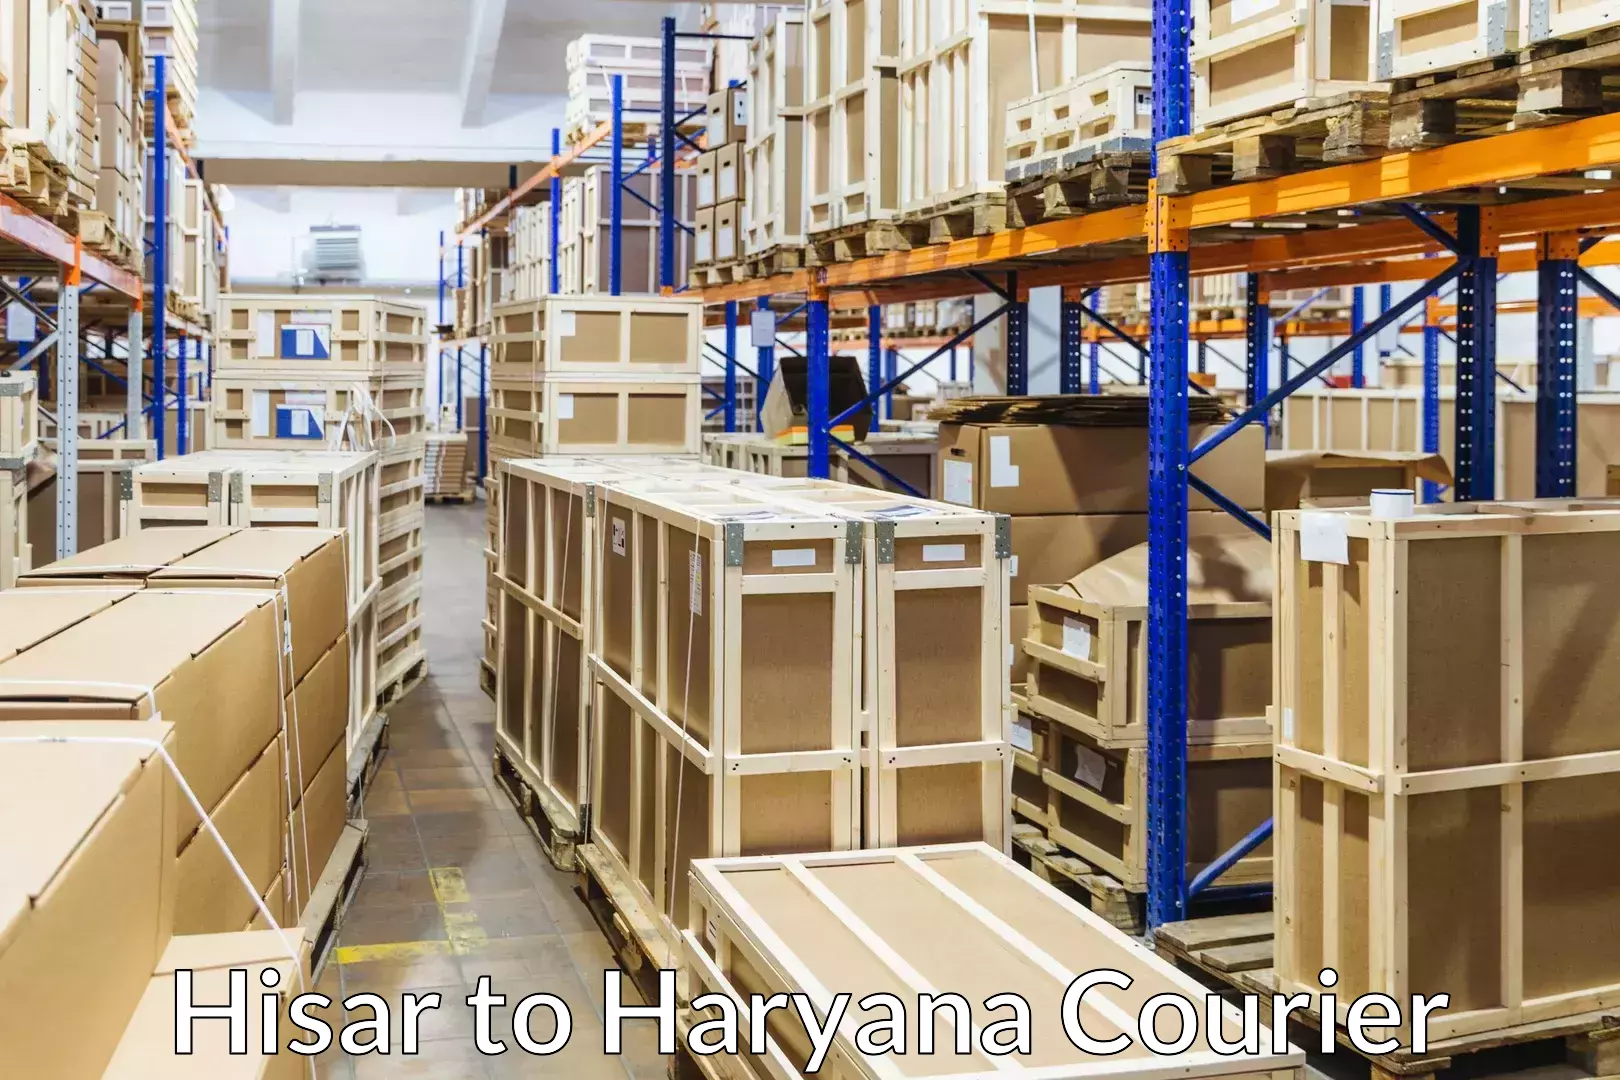 Furniture transport specialists Hisar to Haryana